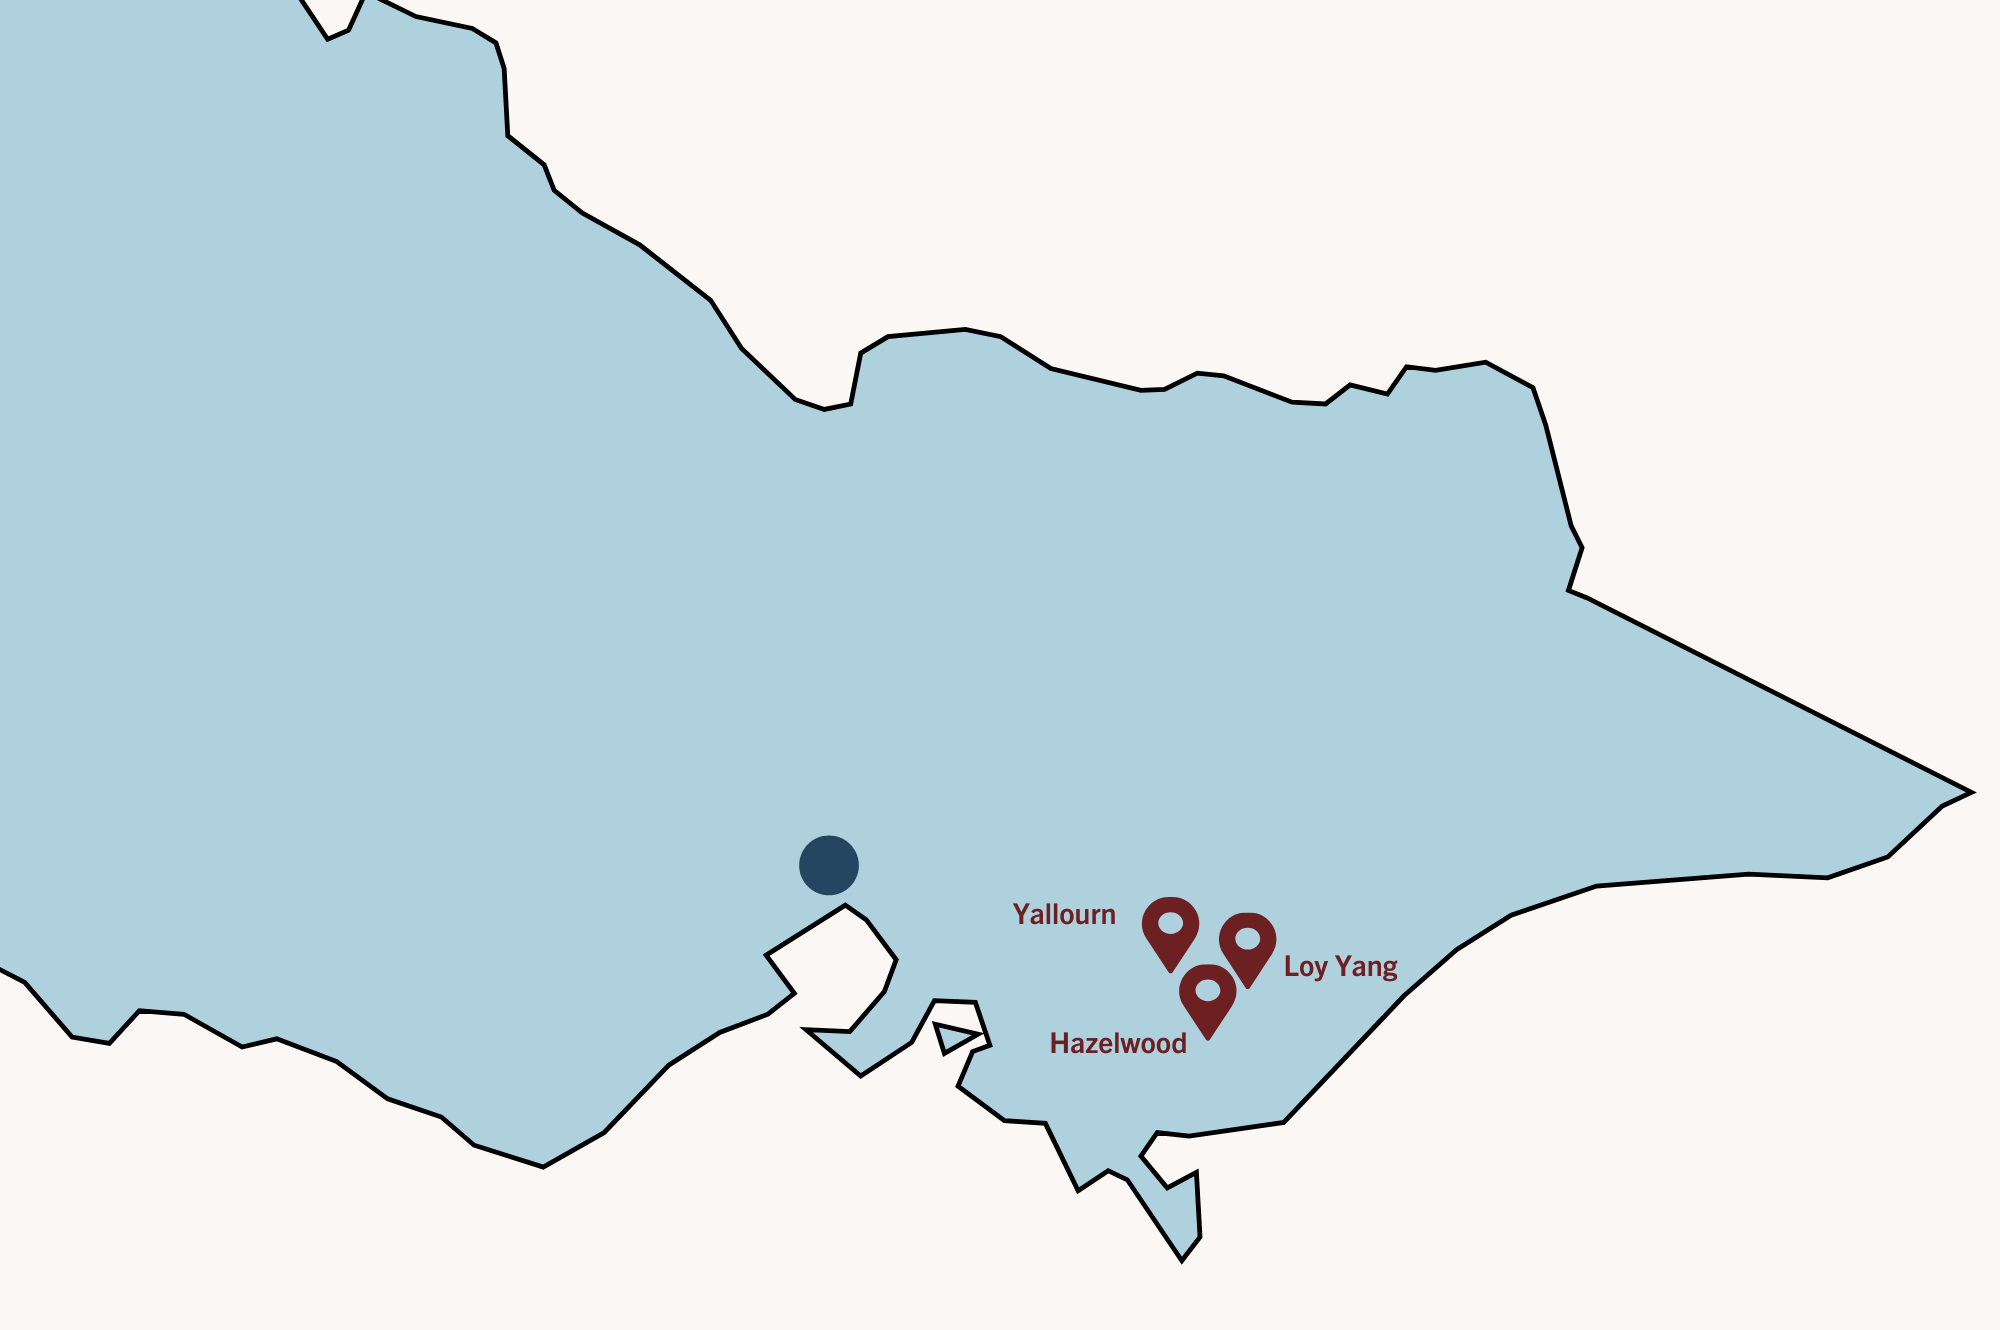 A simple map of three Latrobe Valley mines in Victoria. The three mines are indicated with maroon markers: Yallourn, Loy Yang and Hazelwood.